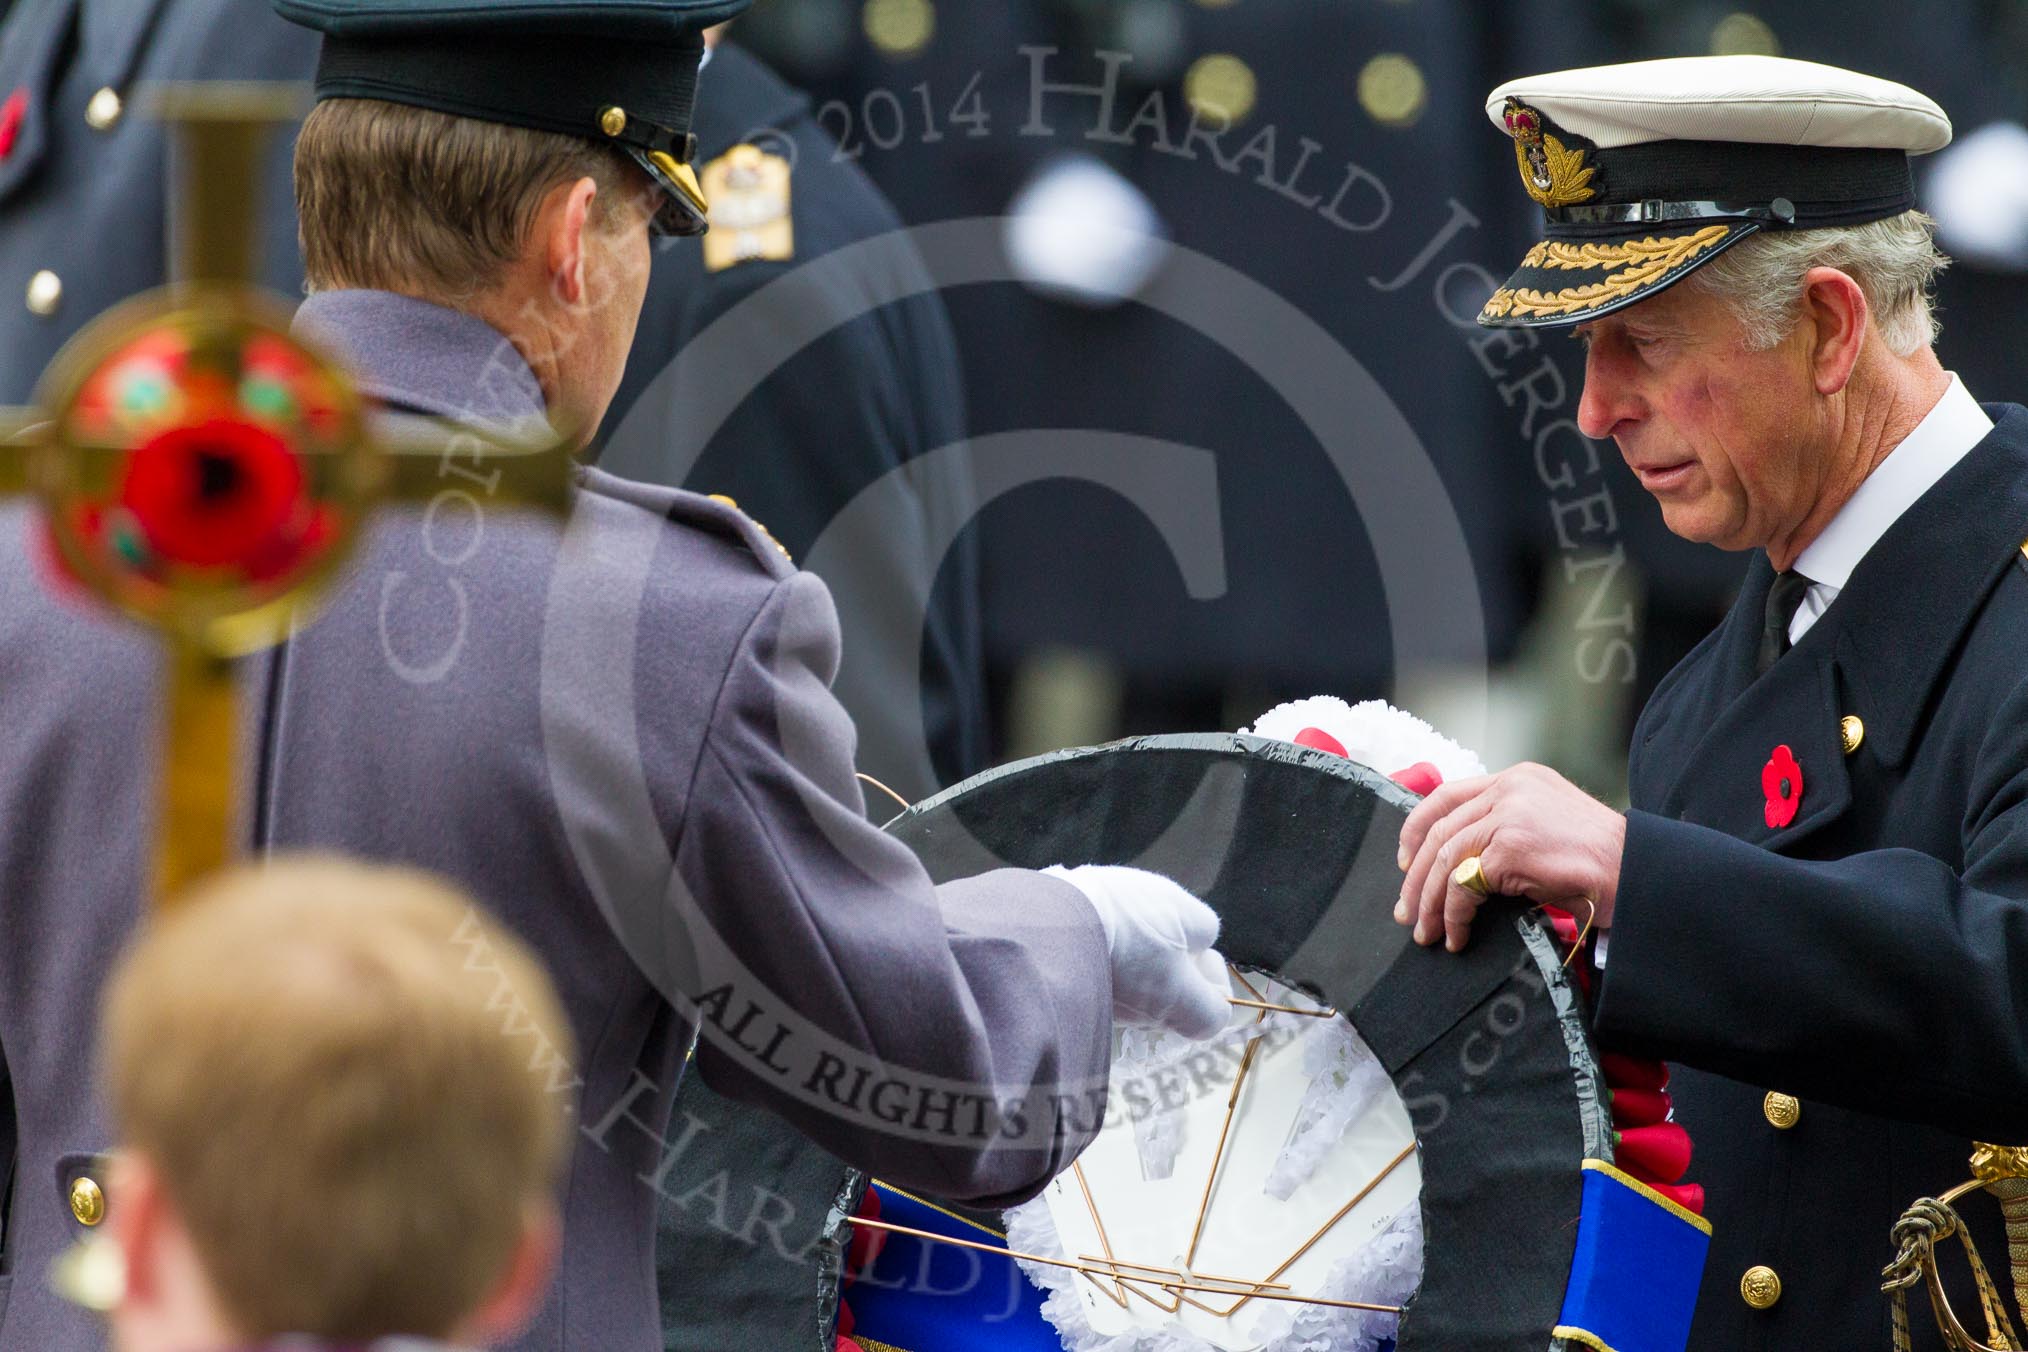 Remembrance Sunday at the Cenotaph in London 2014: Lieutenant Colonel David Bevan, Equerry to HRH The Prince of Wales, handing over the wreath to Prince Charles.
Press stand opposite the Foreign Office building, Whitehall, London SW1,
London,
Greater London,
United Kingdom,
on 09 November 2014 at 11:04, image #194